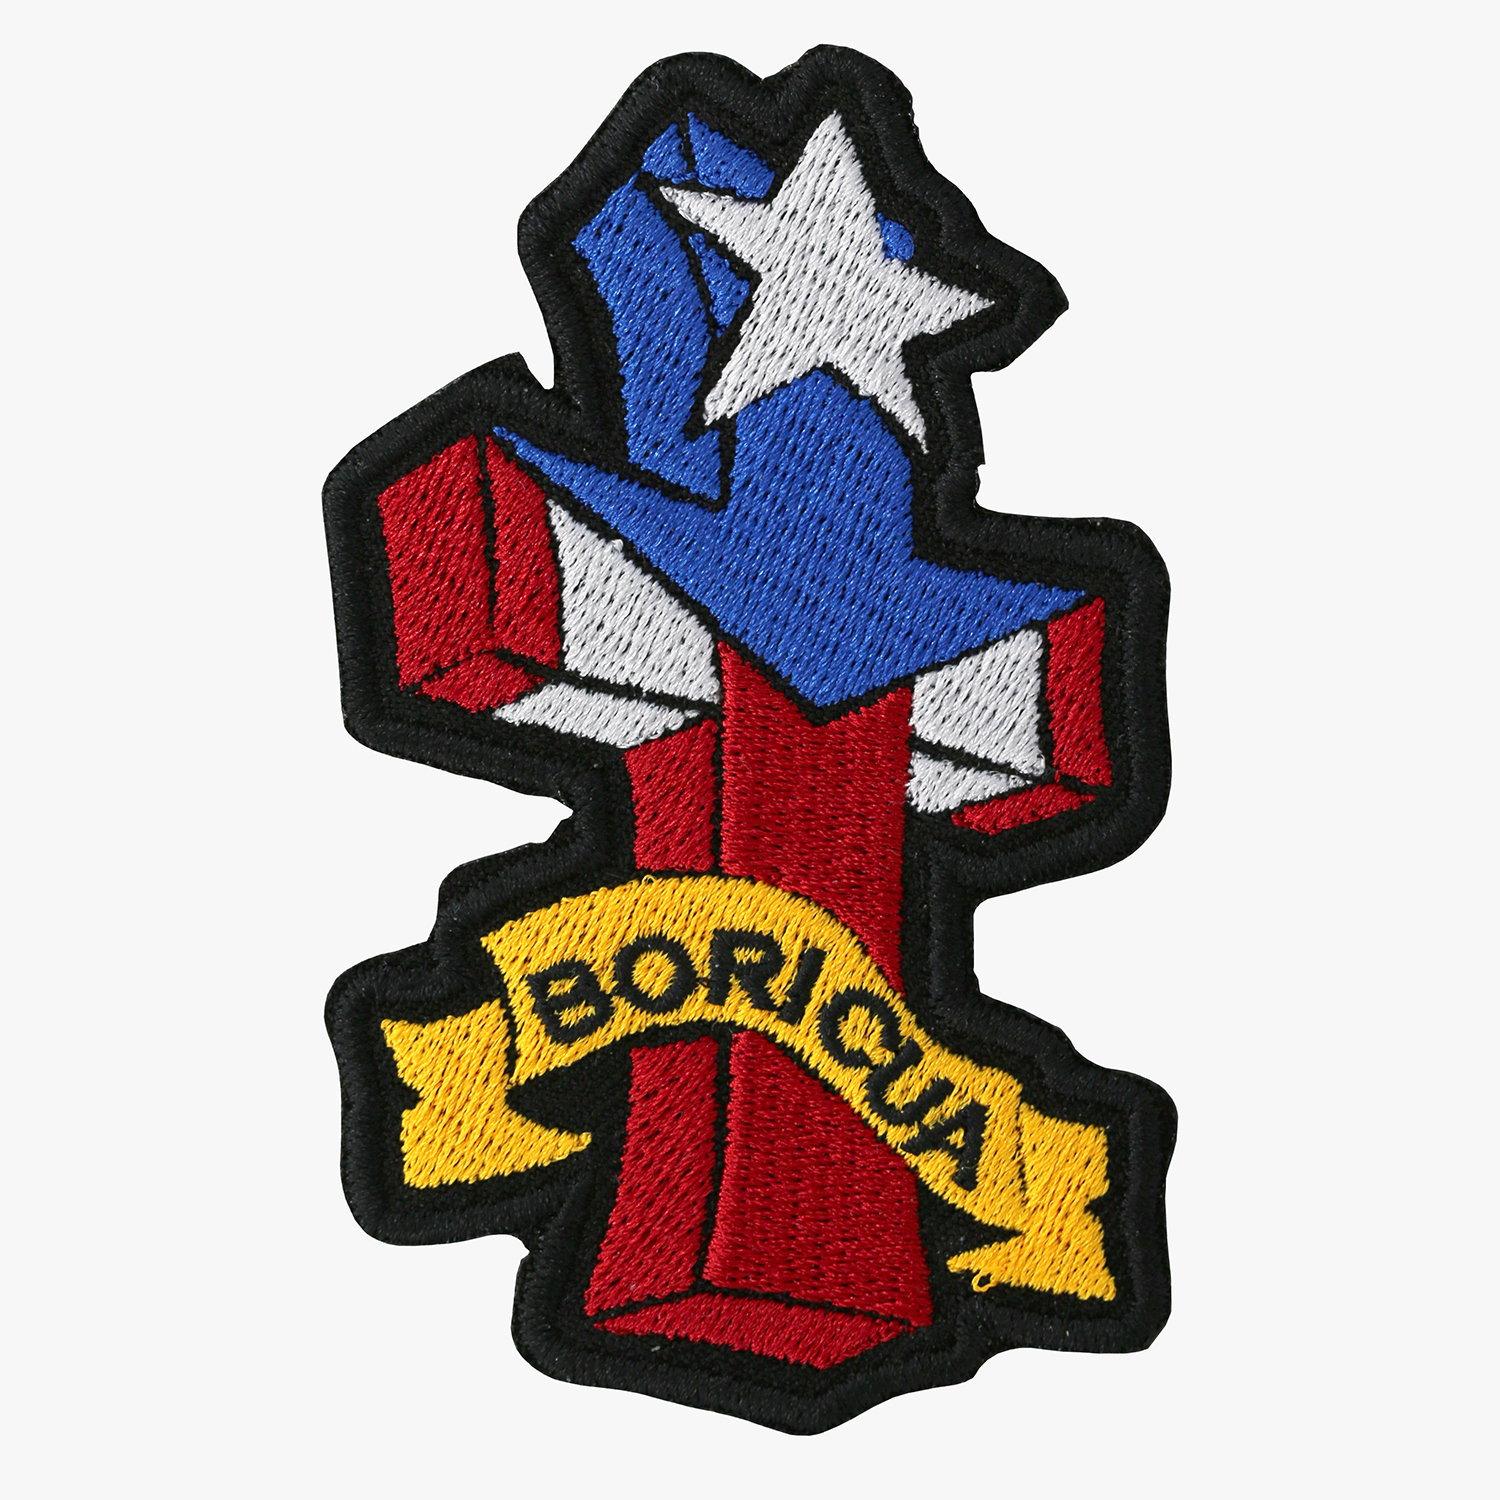 Puerto Rico Cross Flag Embroidered Biker vest Patch